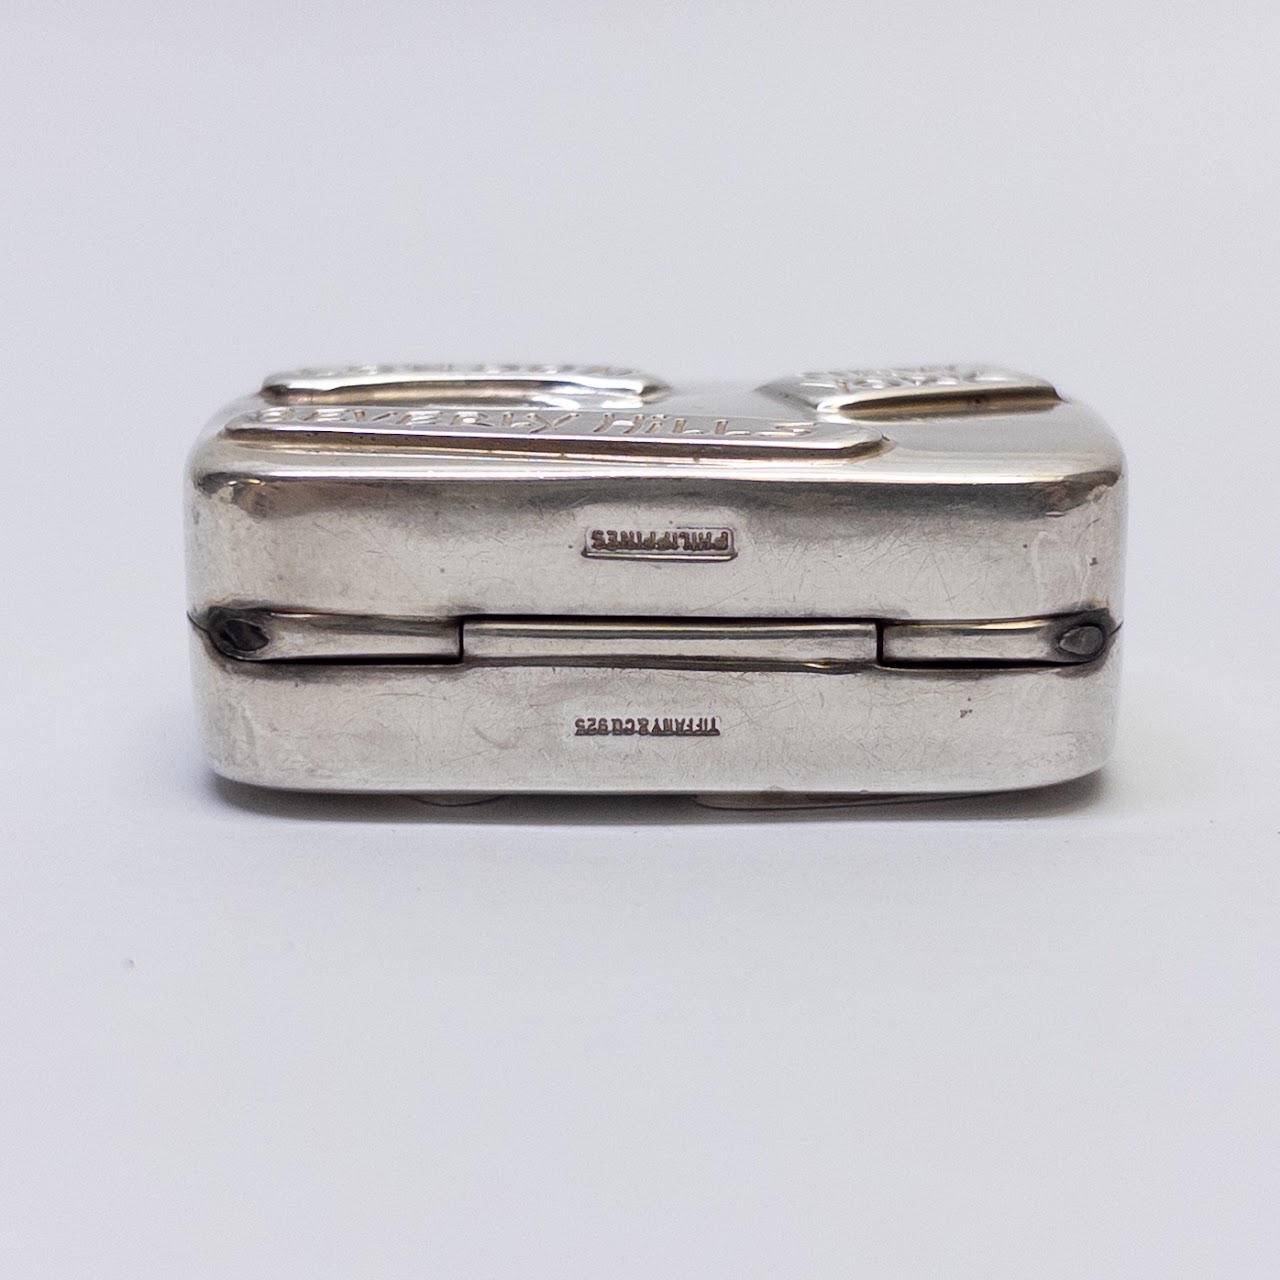 Tiffany & Co. Sterling Silver Suitcase Pillbox